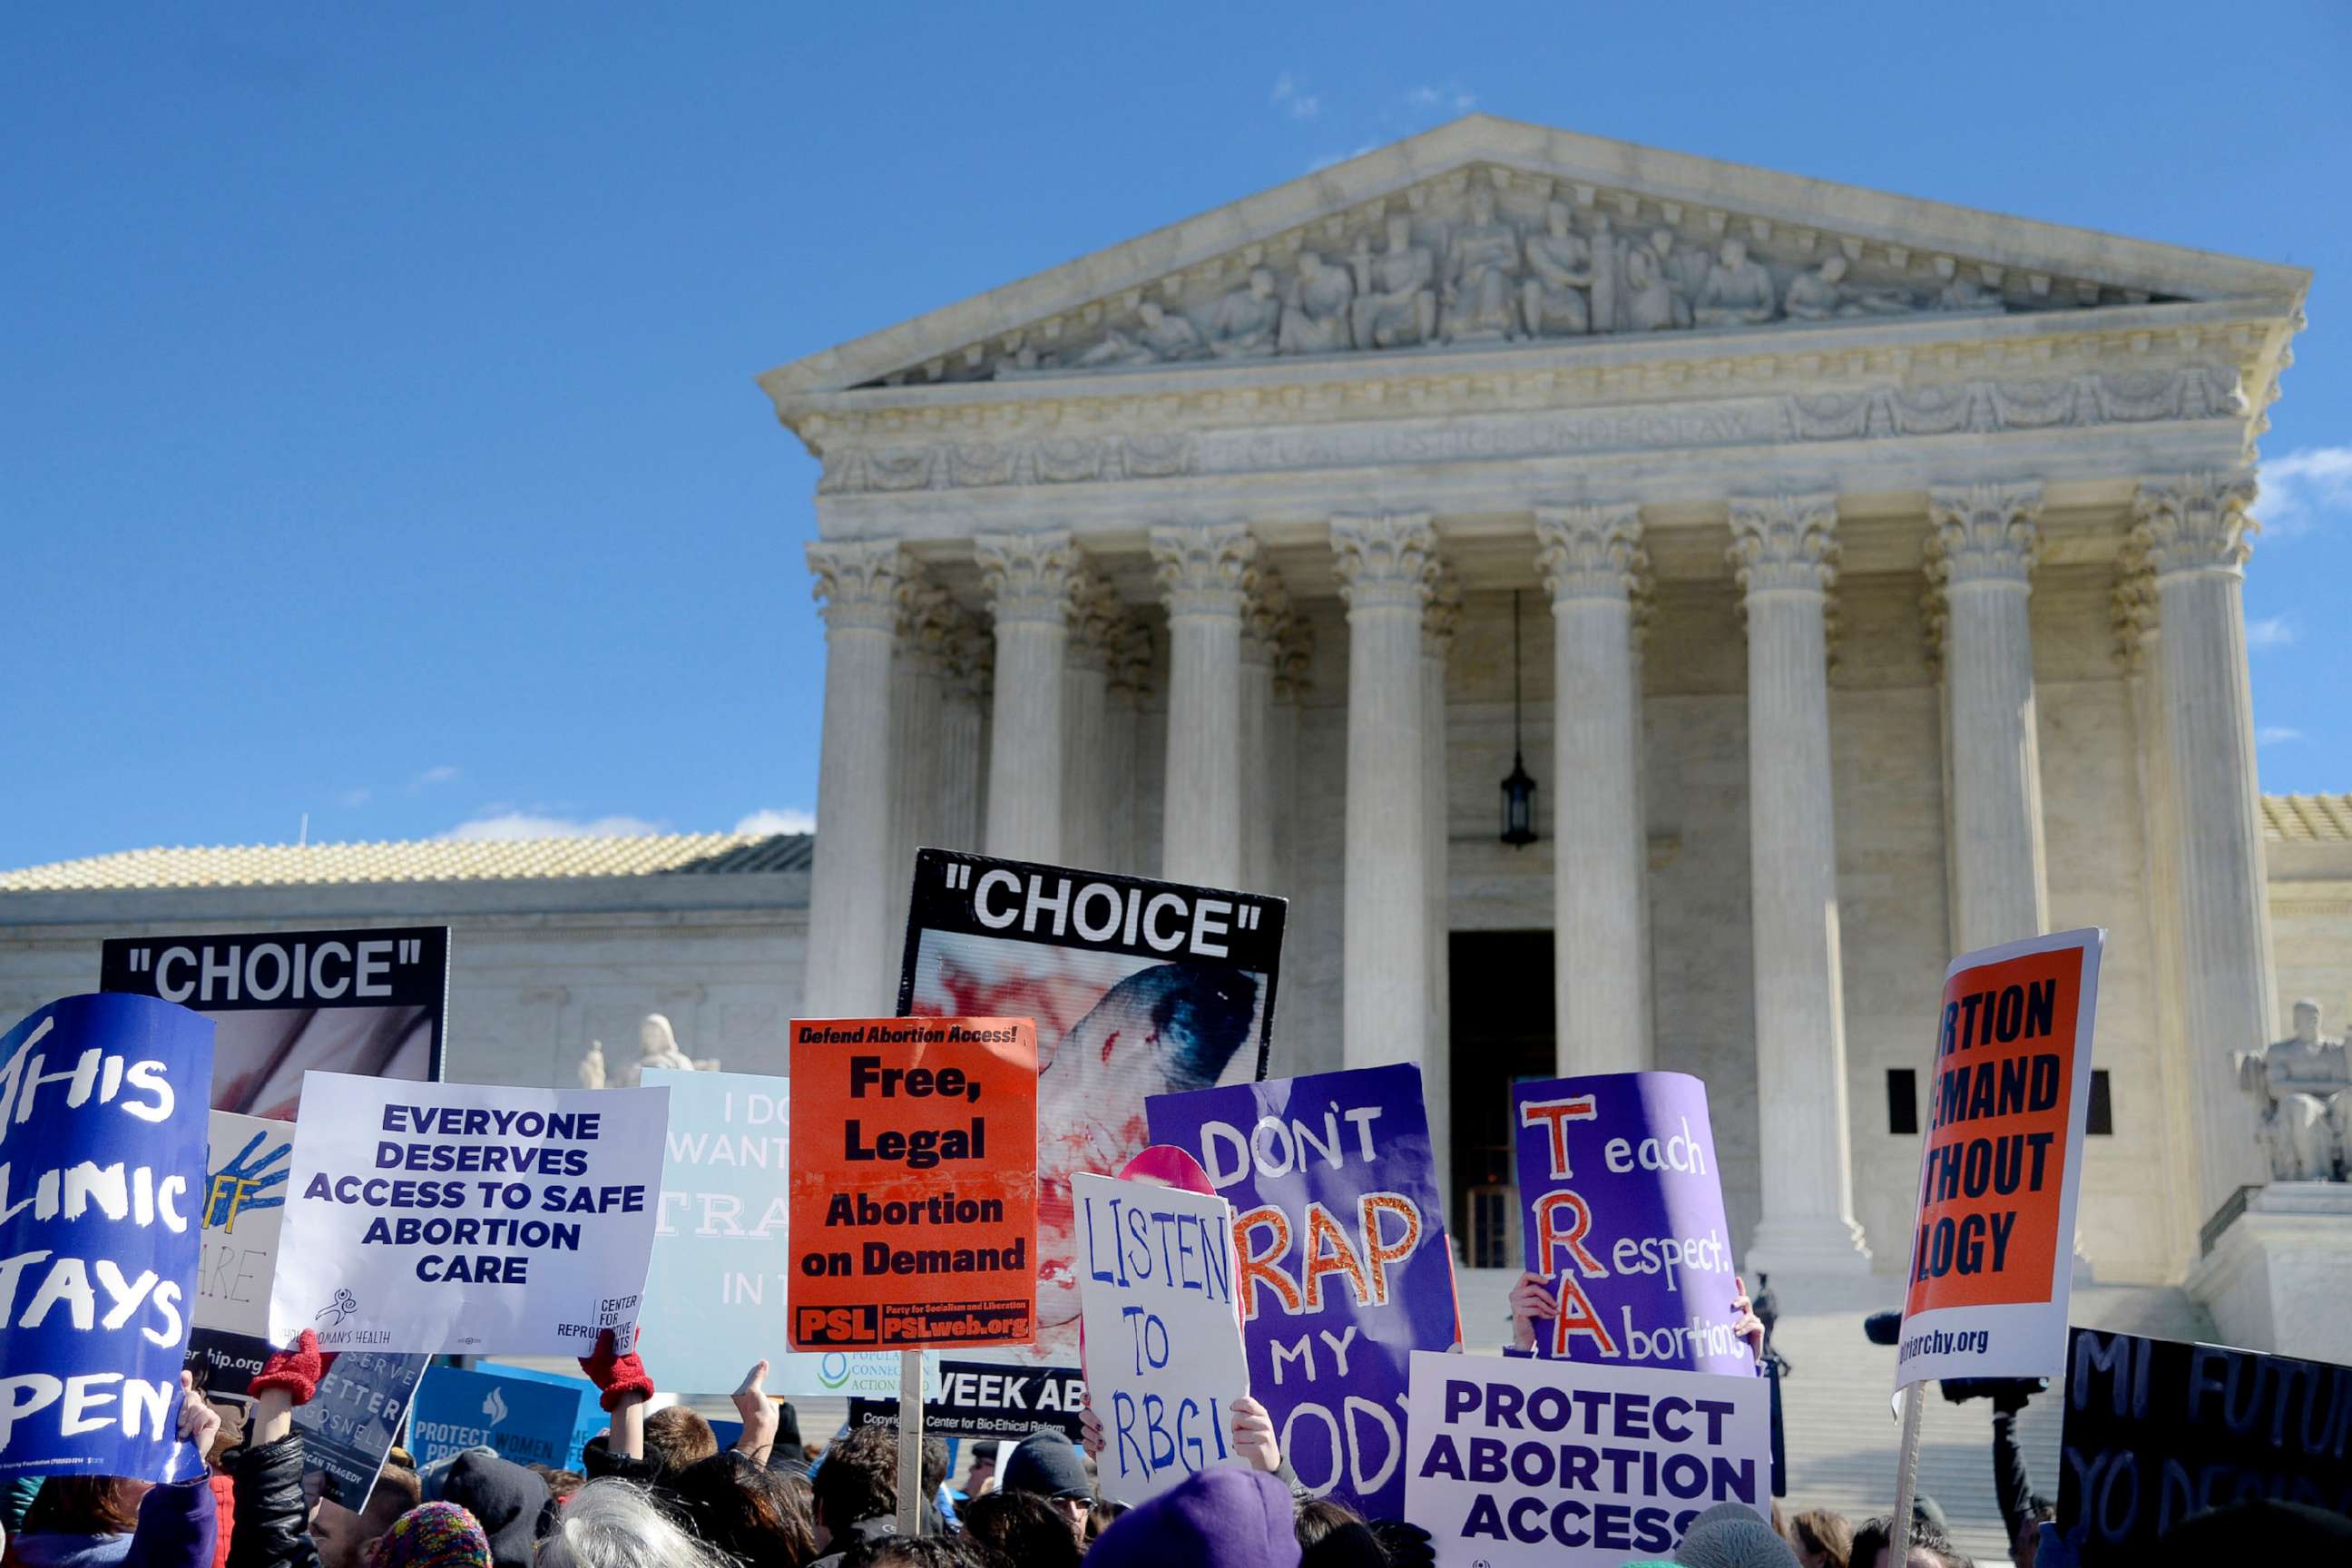 PHOTO: Supporters of legal access to abortion, as well as anti-abortion activists, rally outside the Supreme Court in Washington, March 2, 2016, as the Court hears oral arguments in the case of Whole Woman's Health v. Hellerstedt.